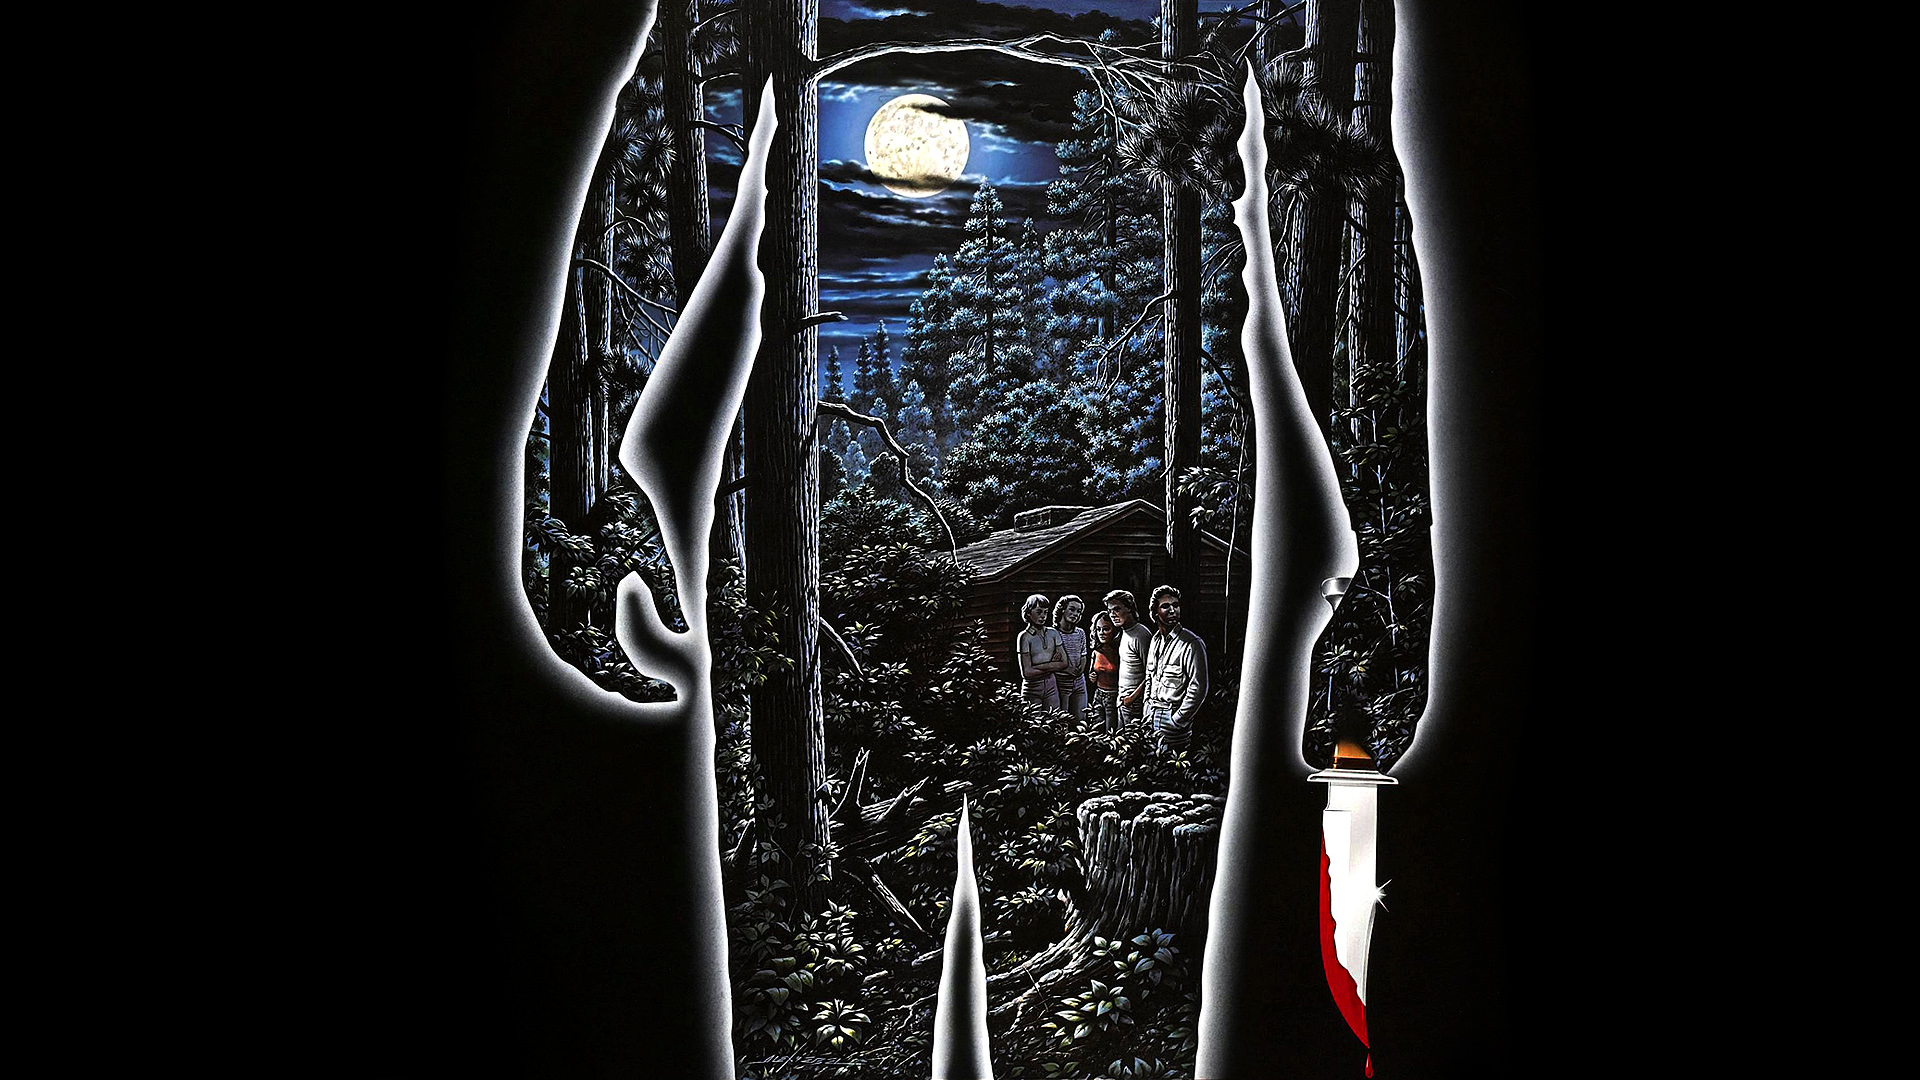 friday the 13th (1980), movie